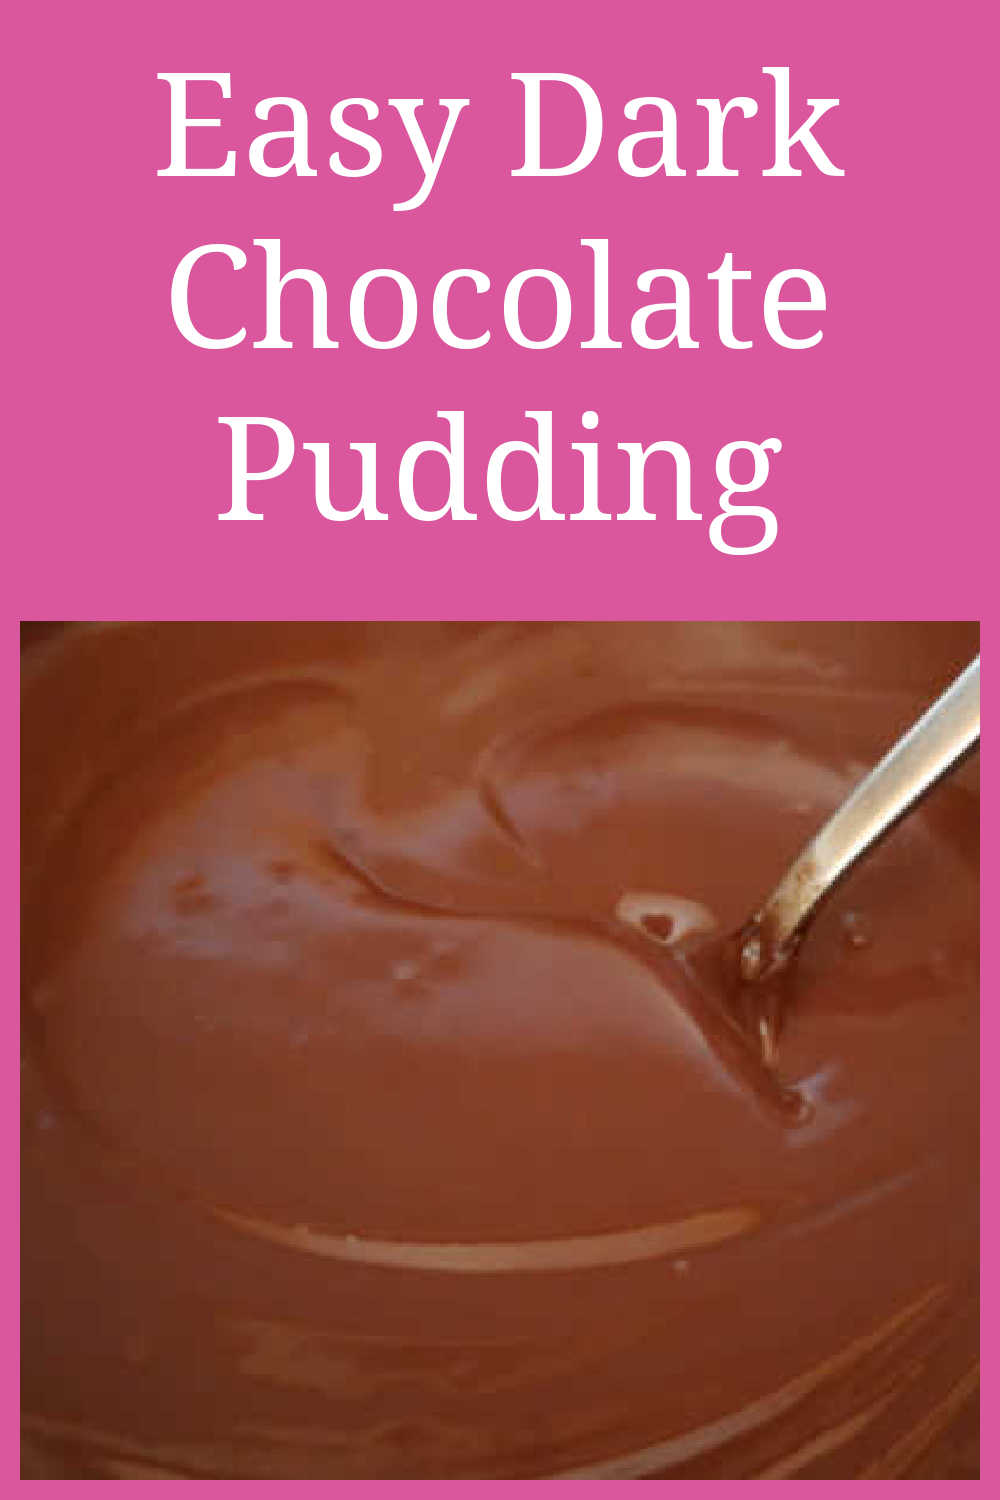 Dark Chocolate Pudding Recipe - How to make a quick, easy and simple homemade chocolate pudding dessert with cornstarch and chocolate chips - without eggs - with the video tutorial.